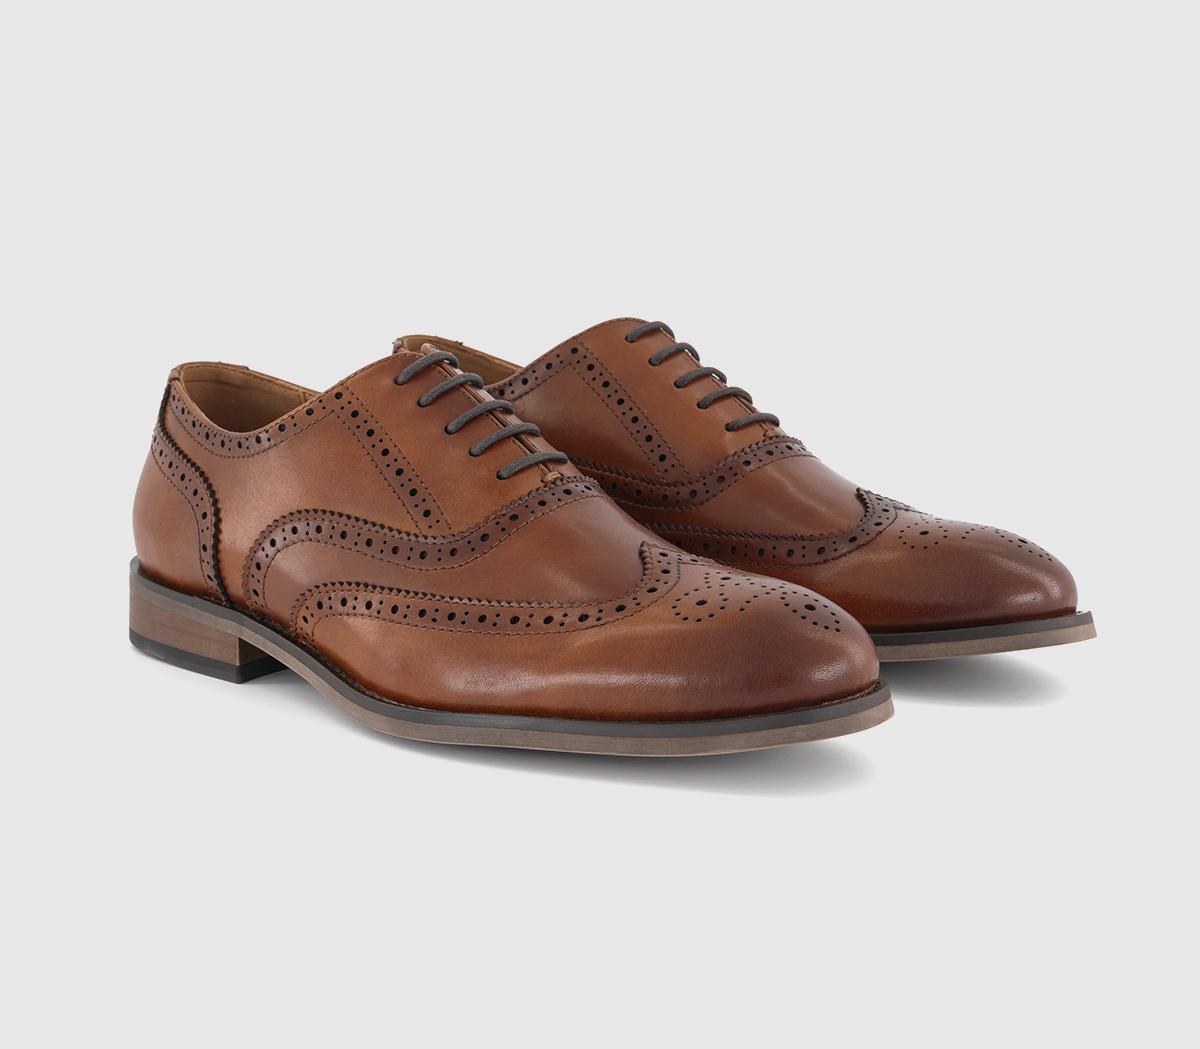 OFFICE Mens Milton Oxford Brogue Shoes Tan Leather, 11